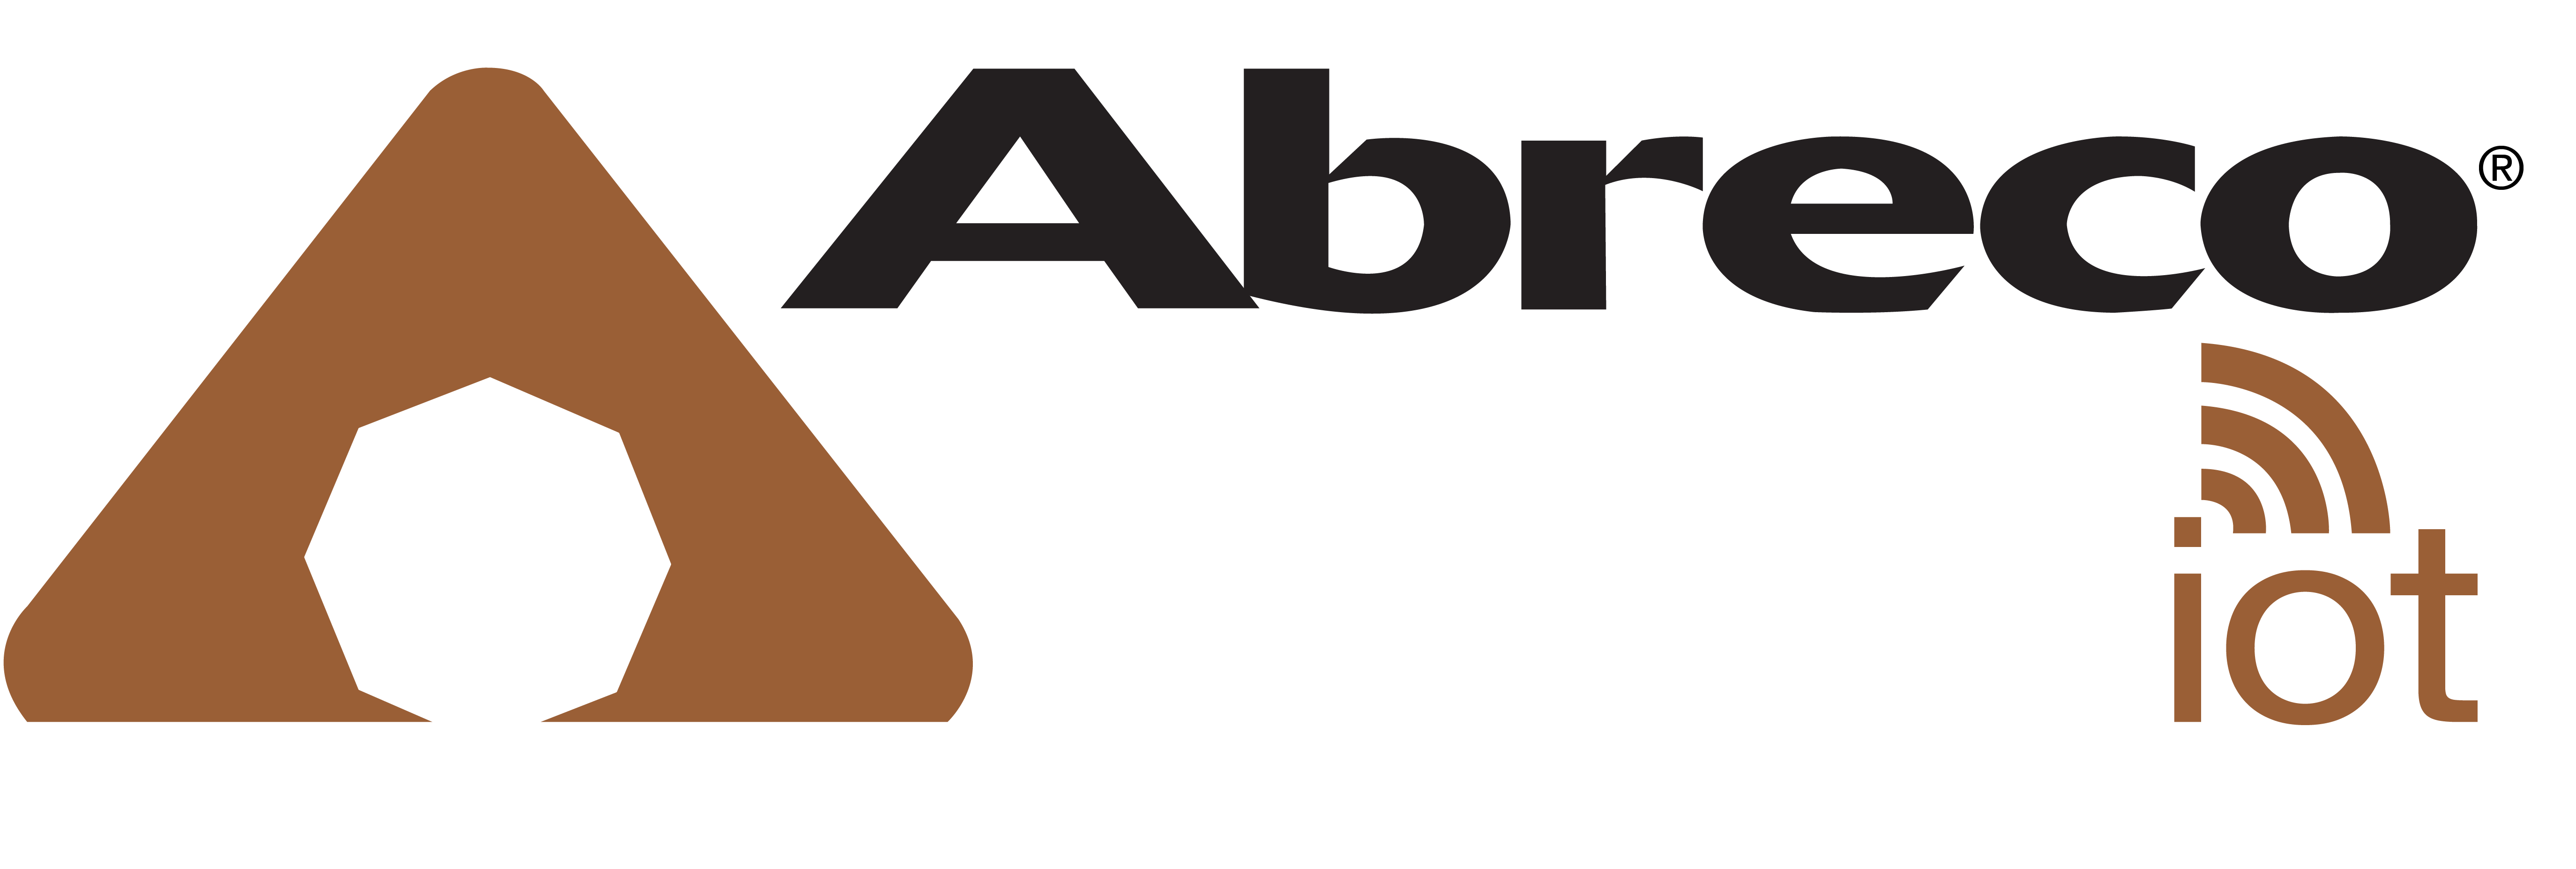 Abreco Wear System_IOT_FINAL_2_Outlines_Abreco Wear System copy 4